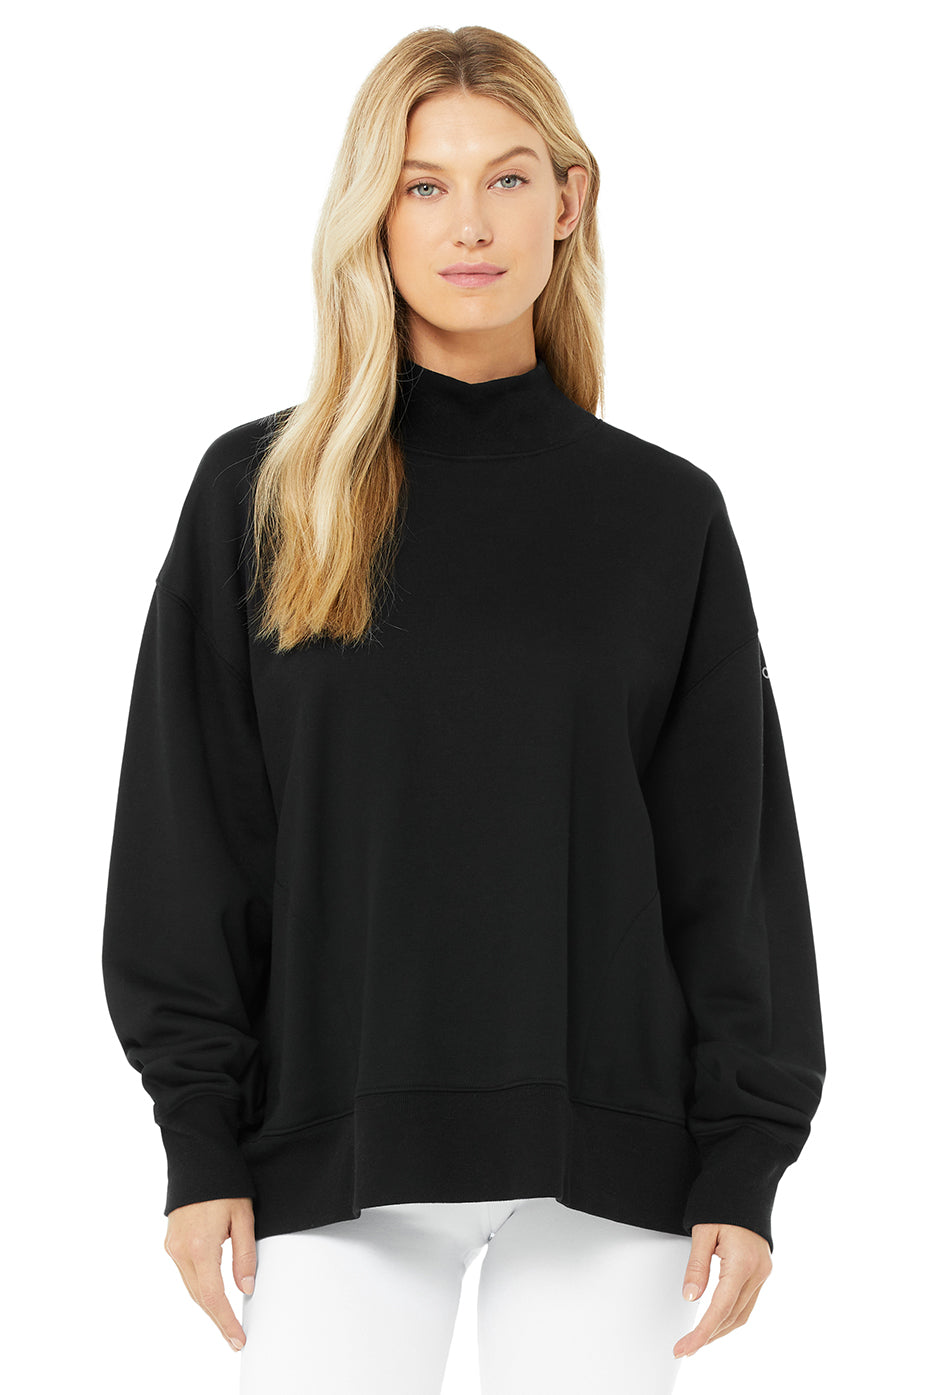 Buy Alo Yoga® Muse V-neck Pullover Top - Black At 30% Off